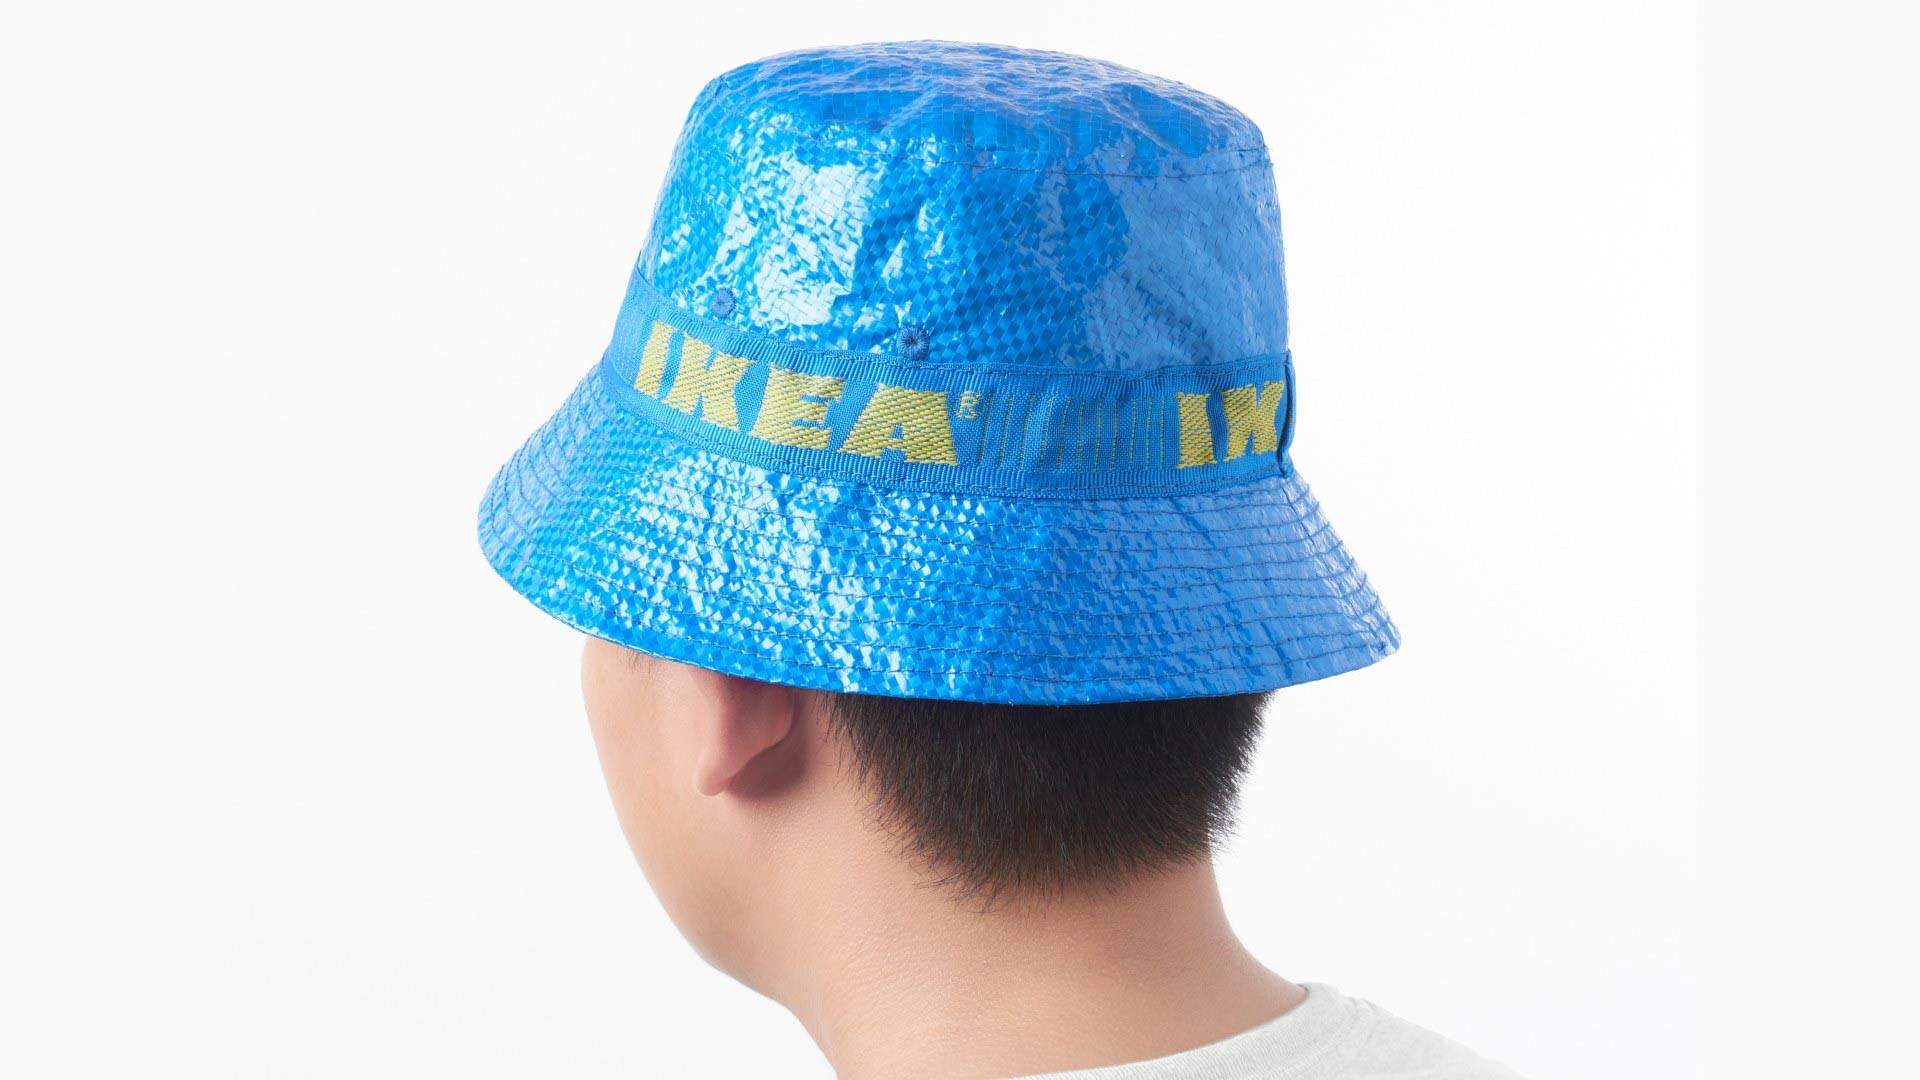 IKEA Is Now Selling Bucket Hats Made from the Same Material as Its Iconic Blue Shopping Bags